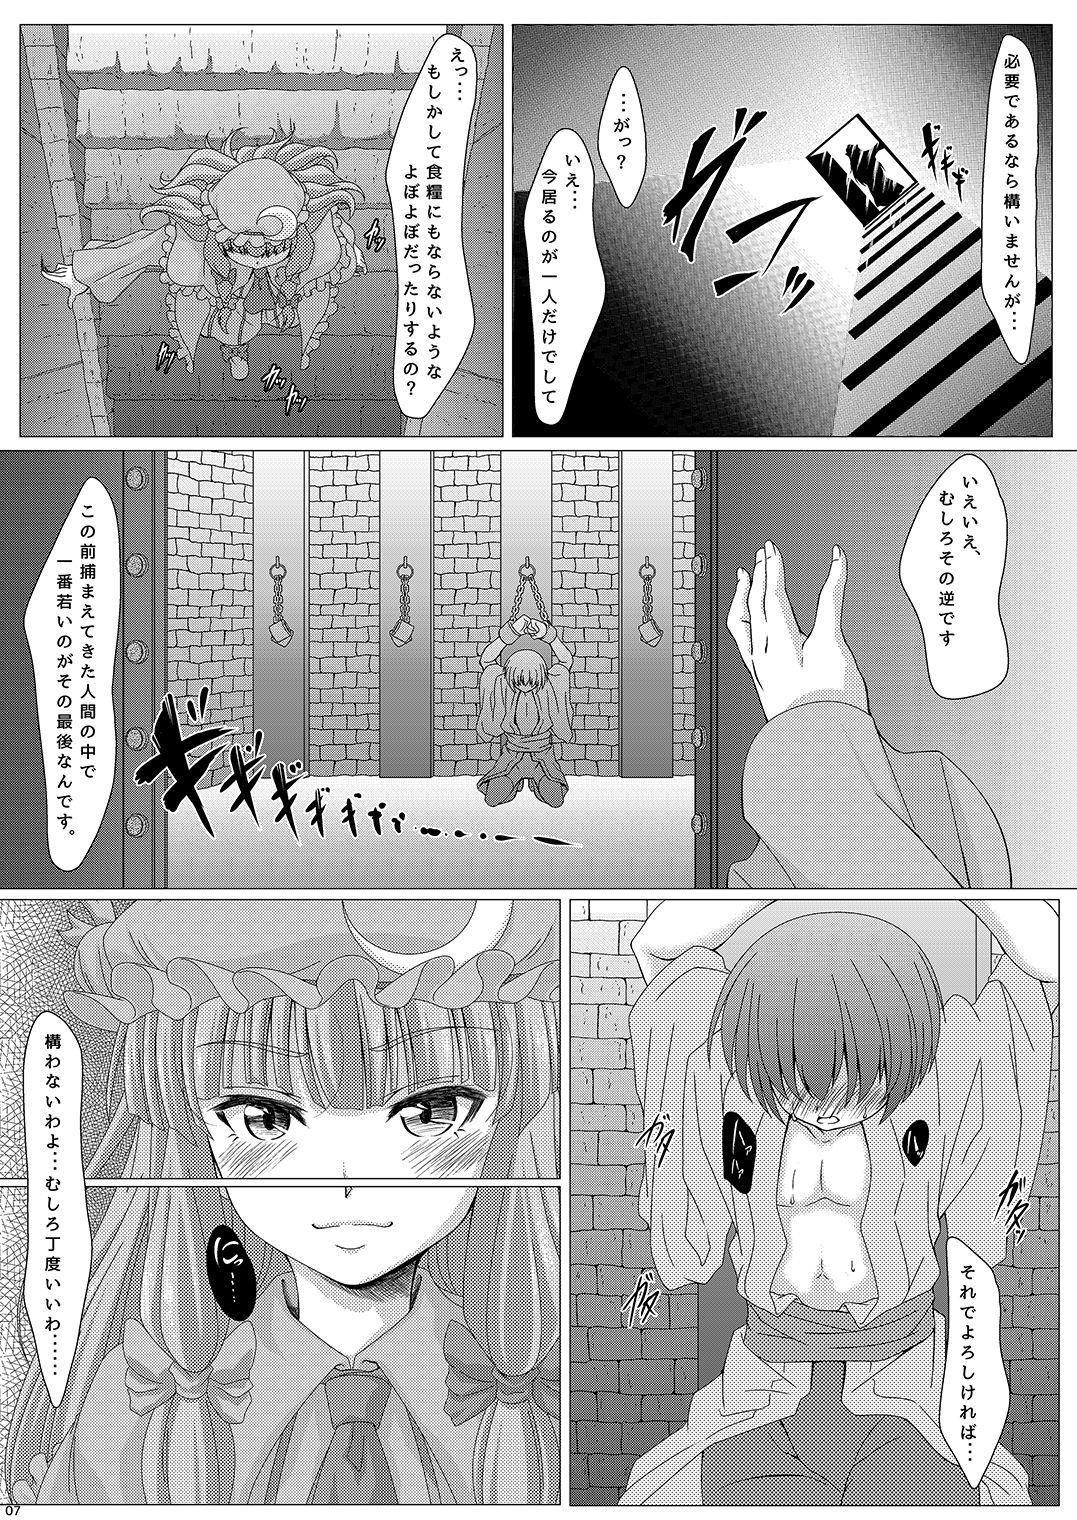 Lady Touhouhimekamiden Ni - Touhou project Huge Boobs - Page 6